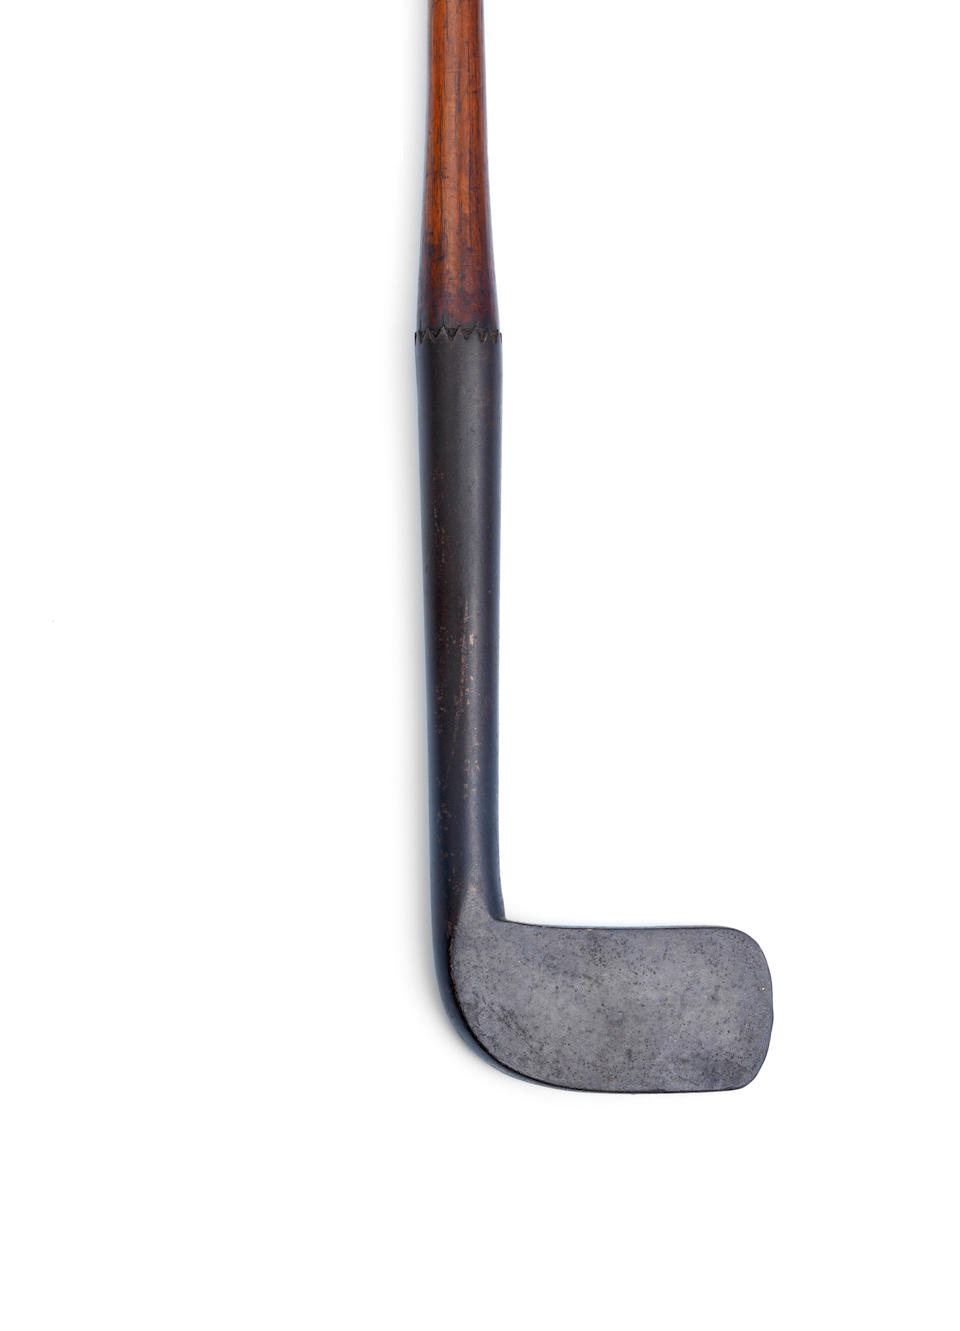 An extremely rare iron headed putter  circa 1780